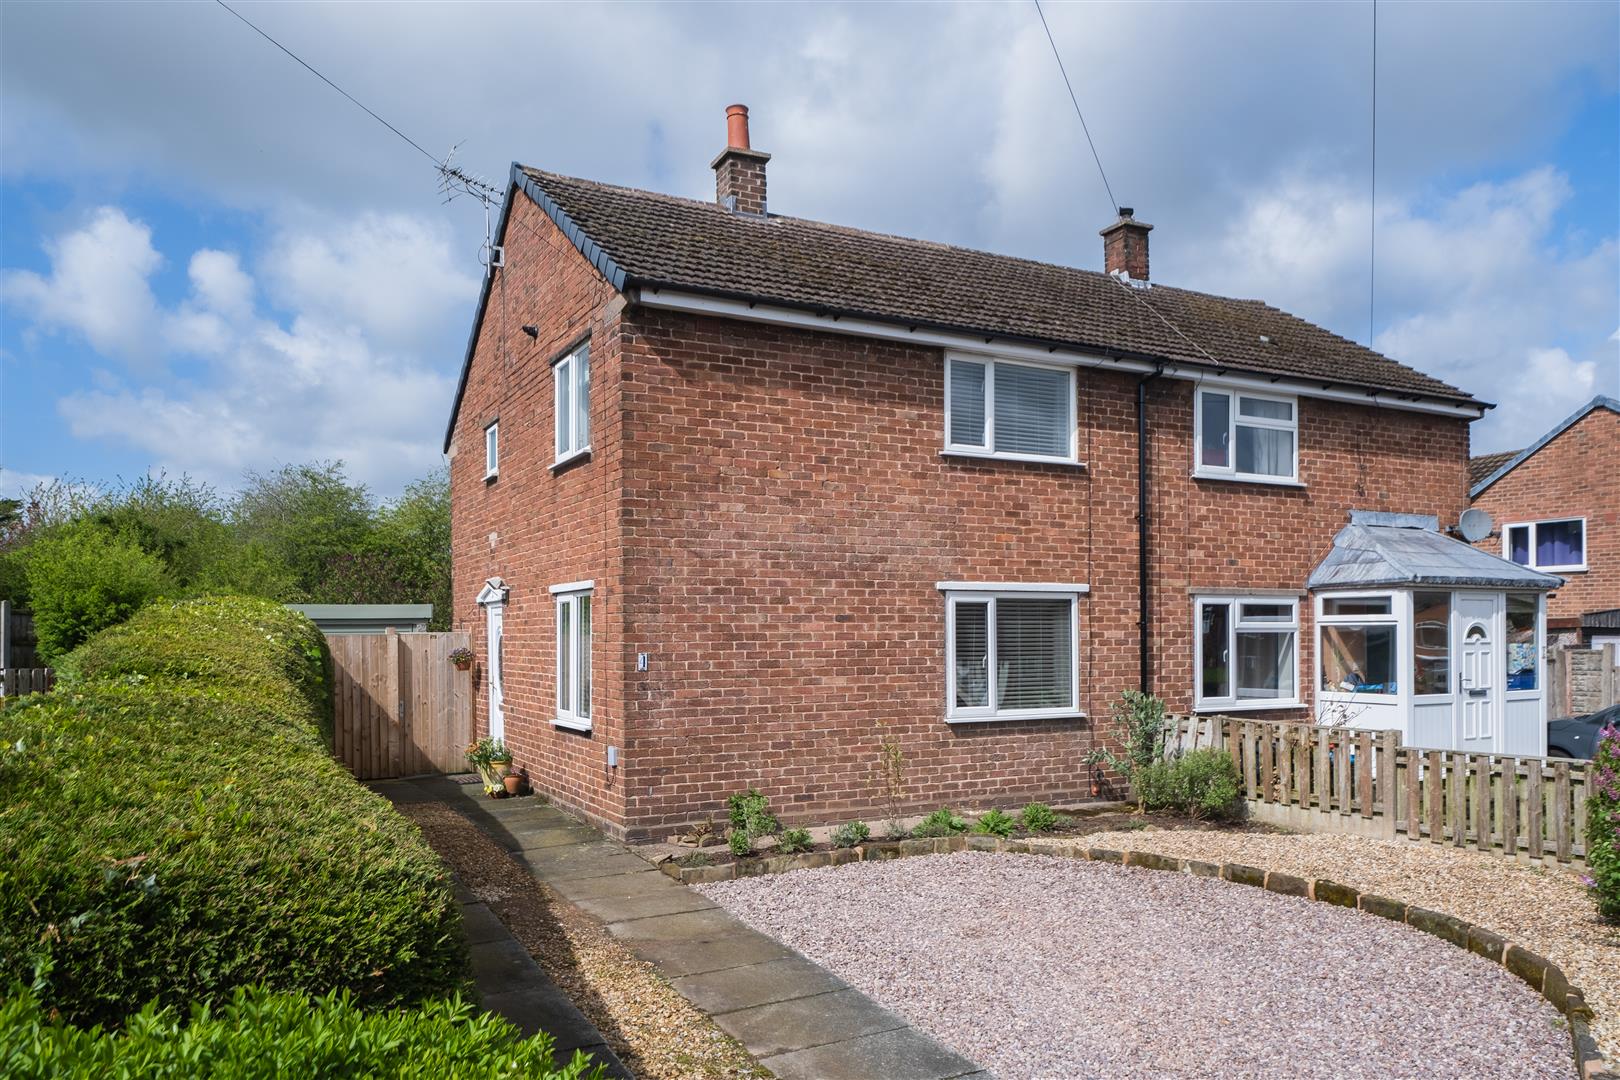 3 bedroom  Semi Detached House for Sale in Northwich